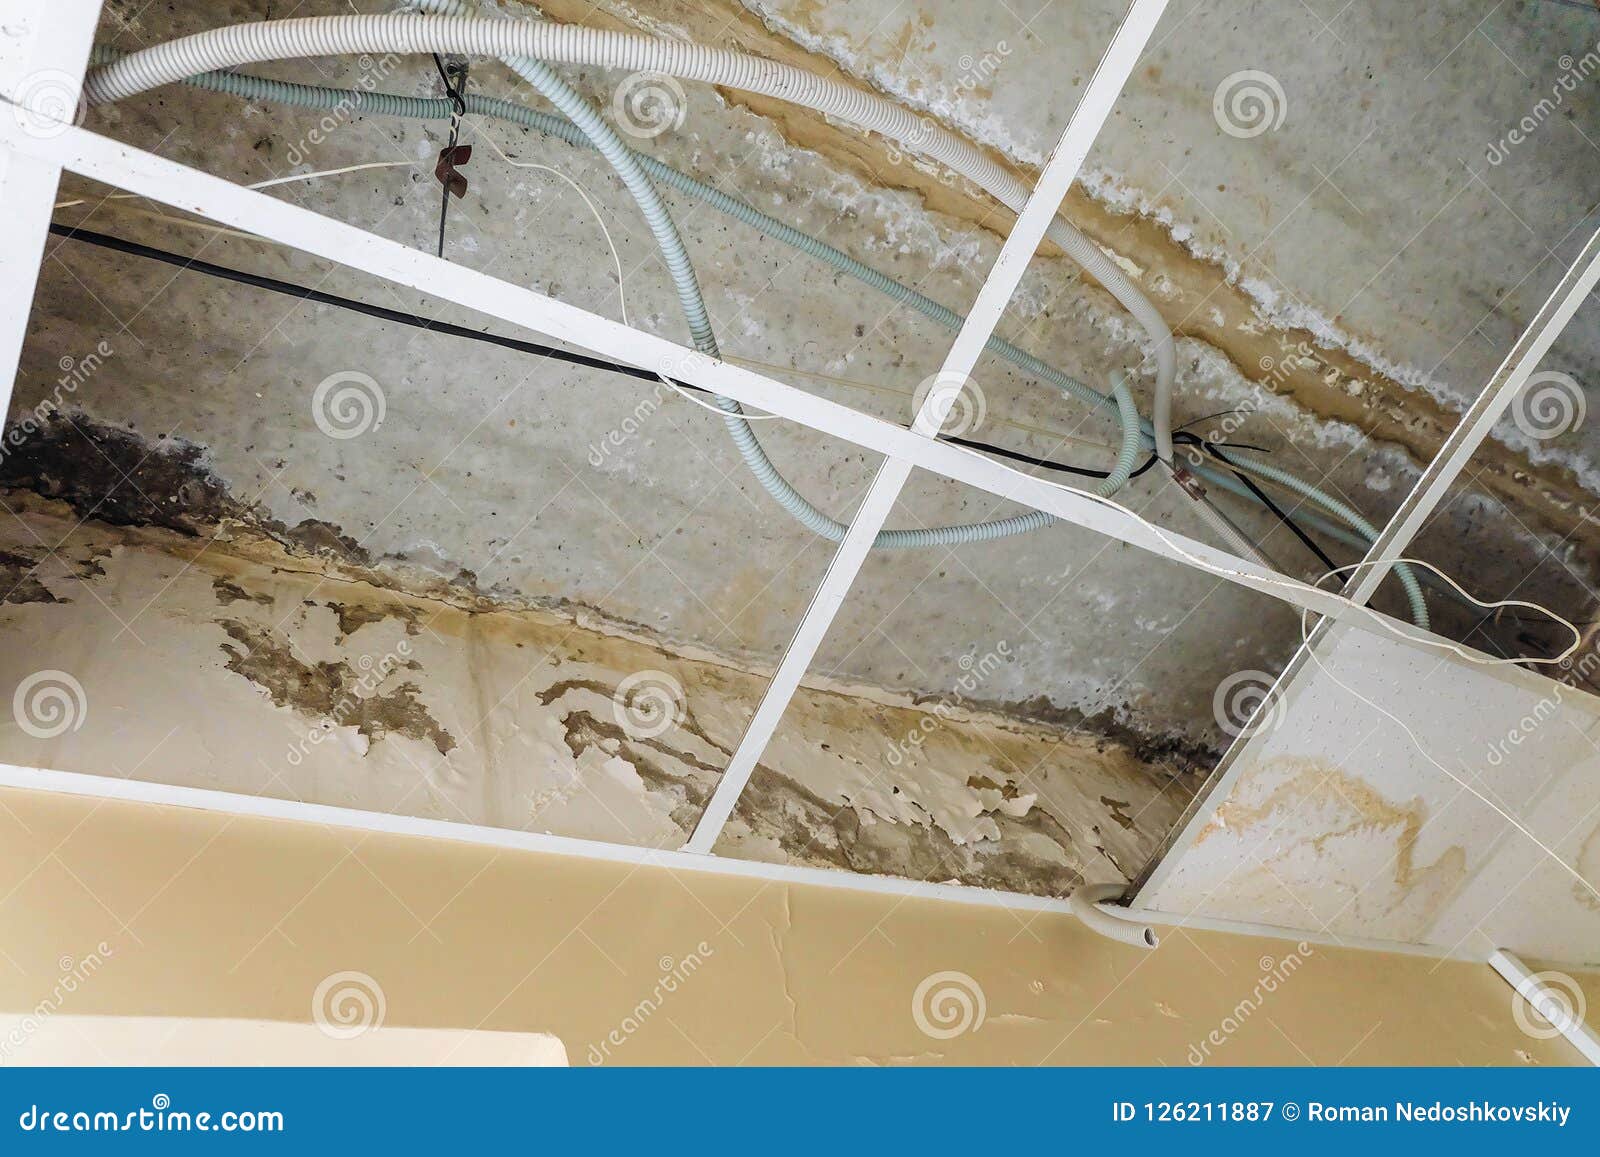 Damaged Suspended Ceiling With Water Leaks Stock Image Image Of